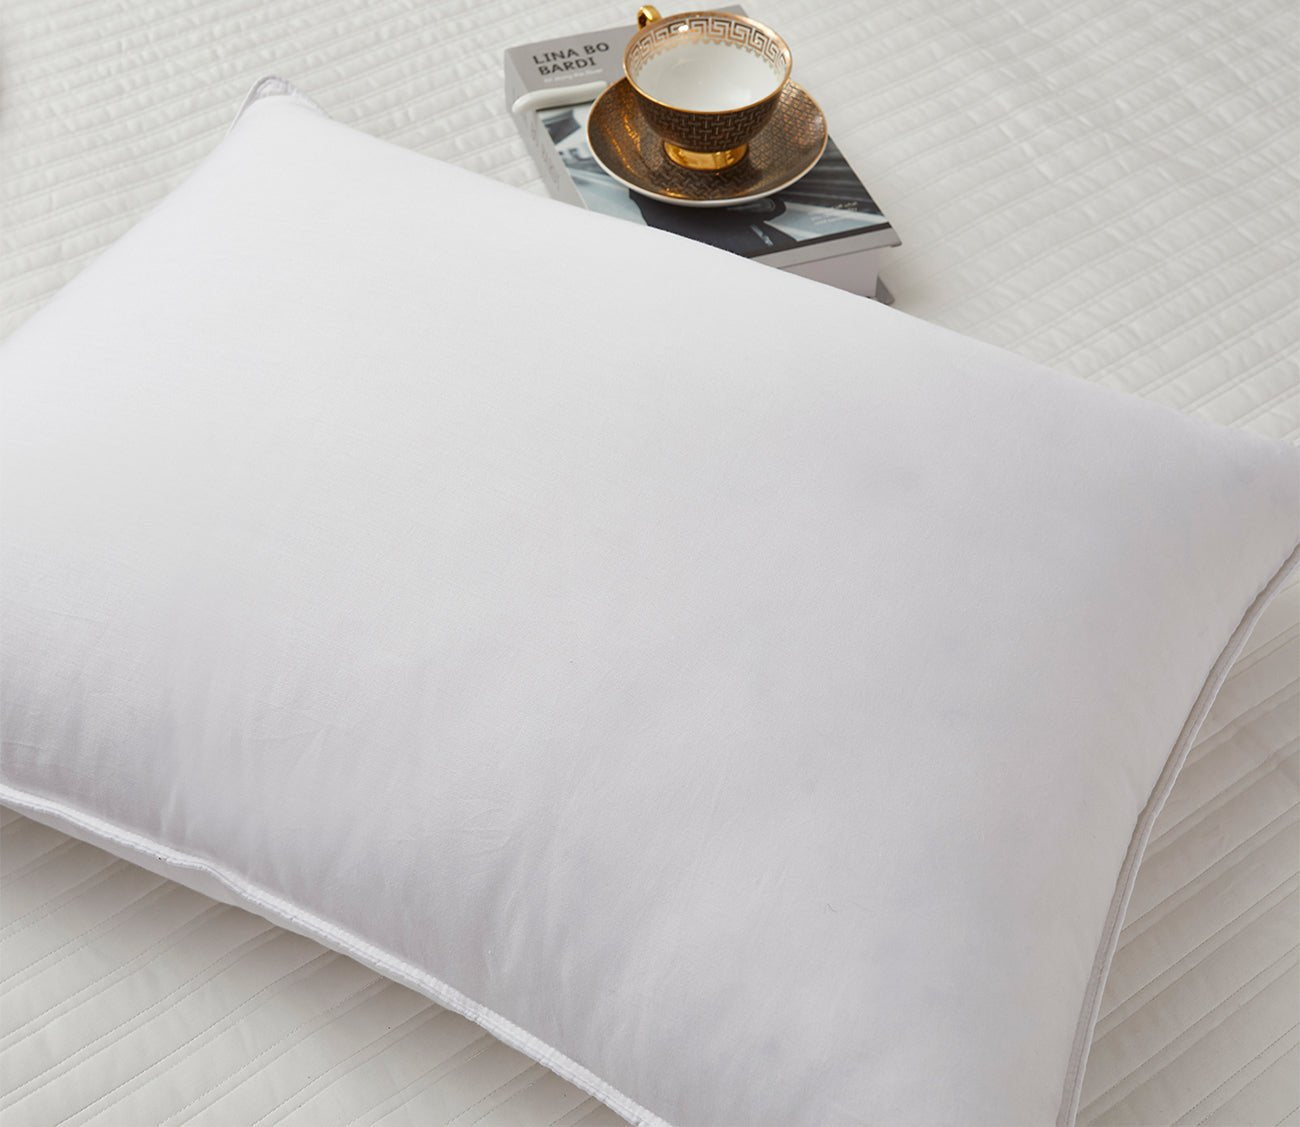 Sealy 100% Cotton Firm Support Pillow - White - Jumbo